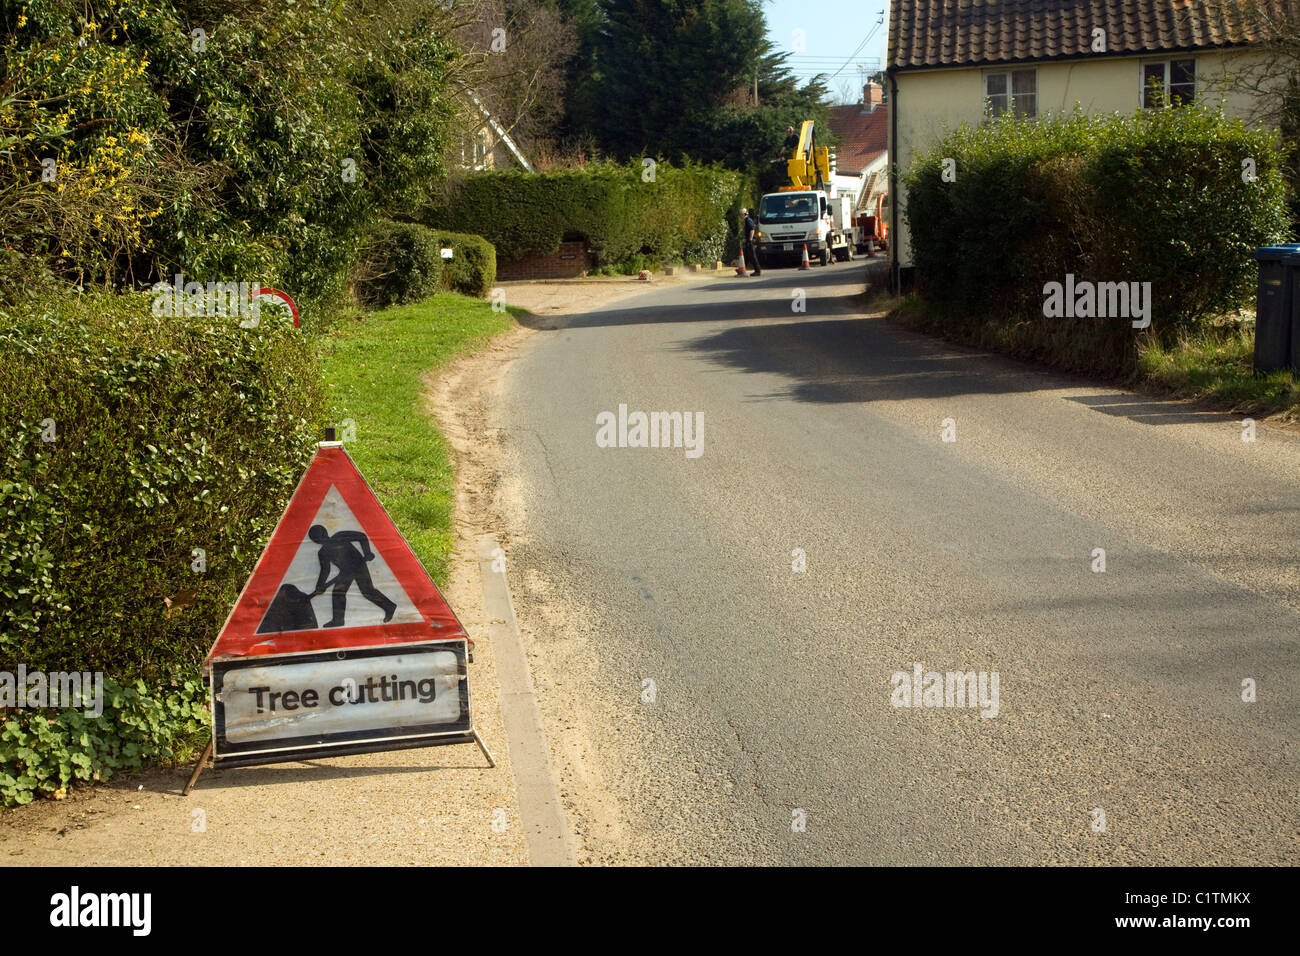 Tree cutting in operation sign village street Stock Photo